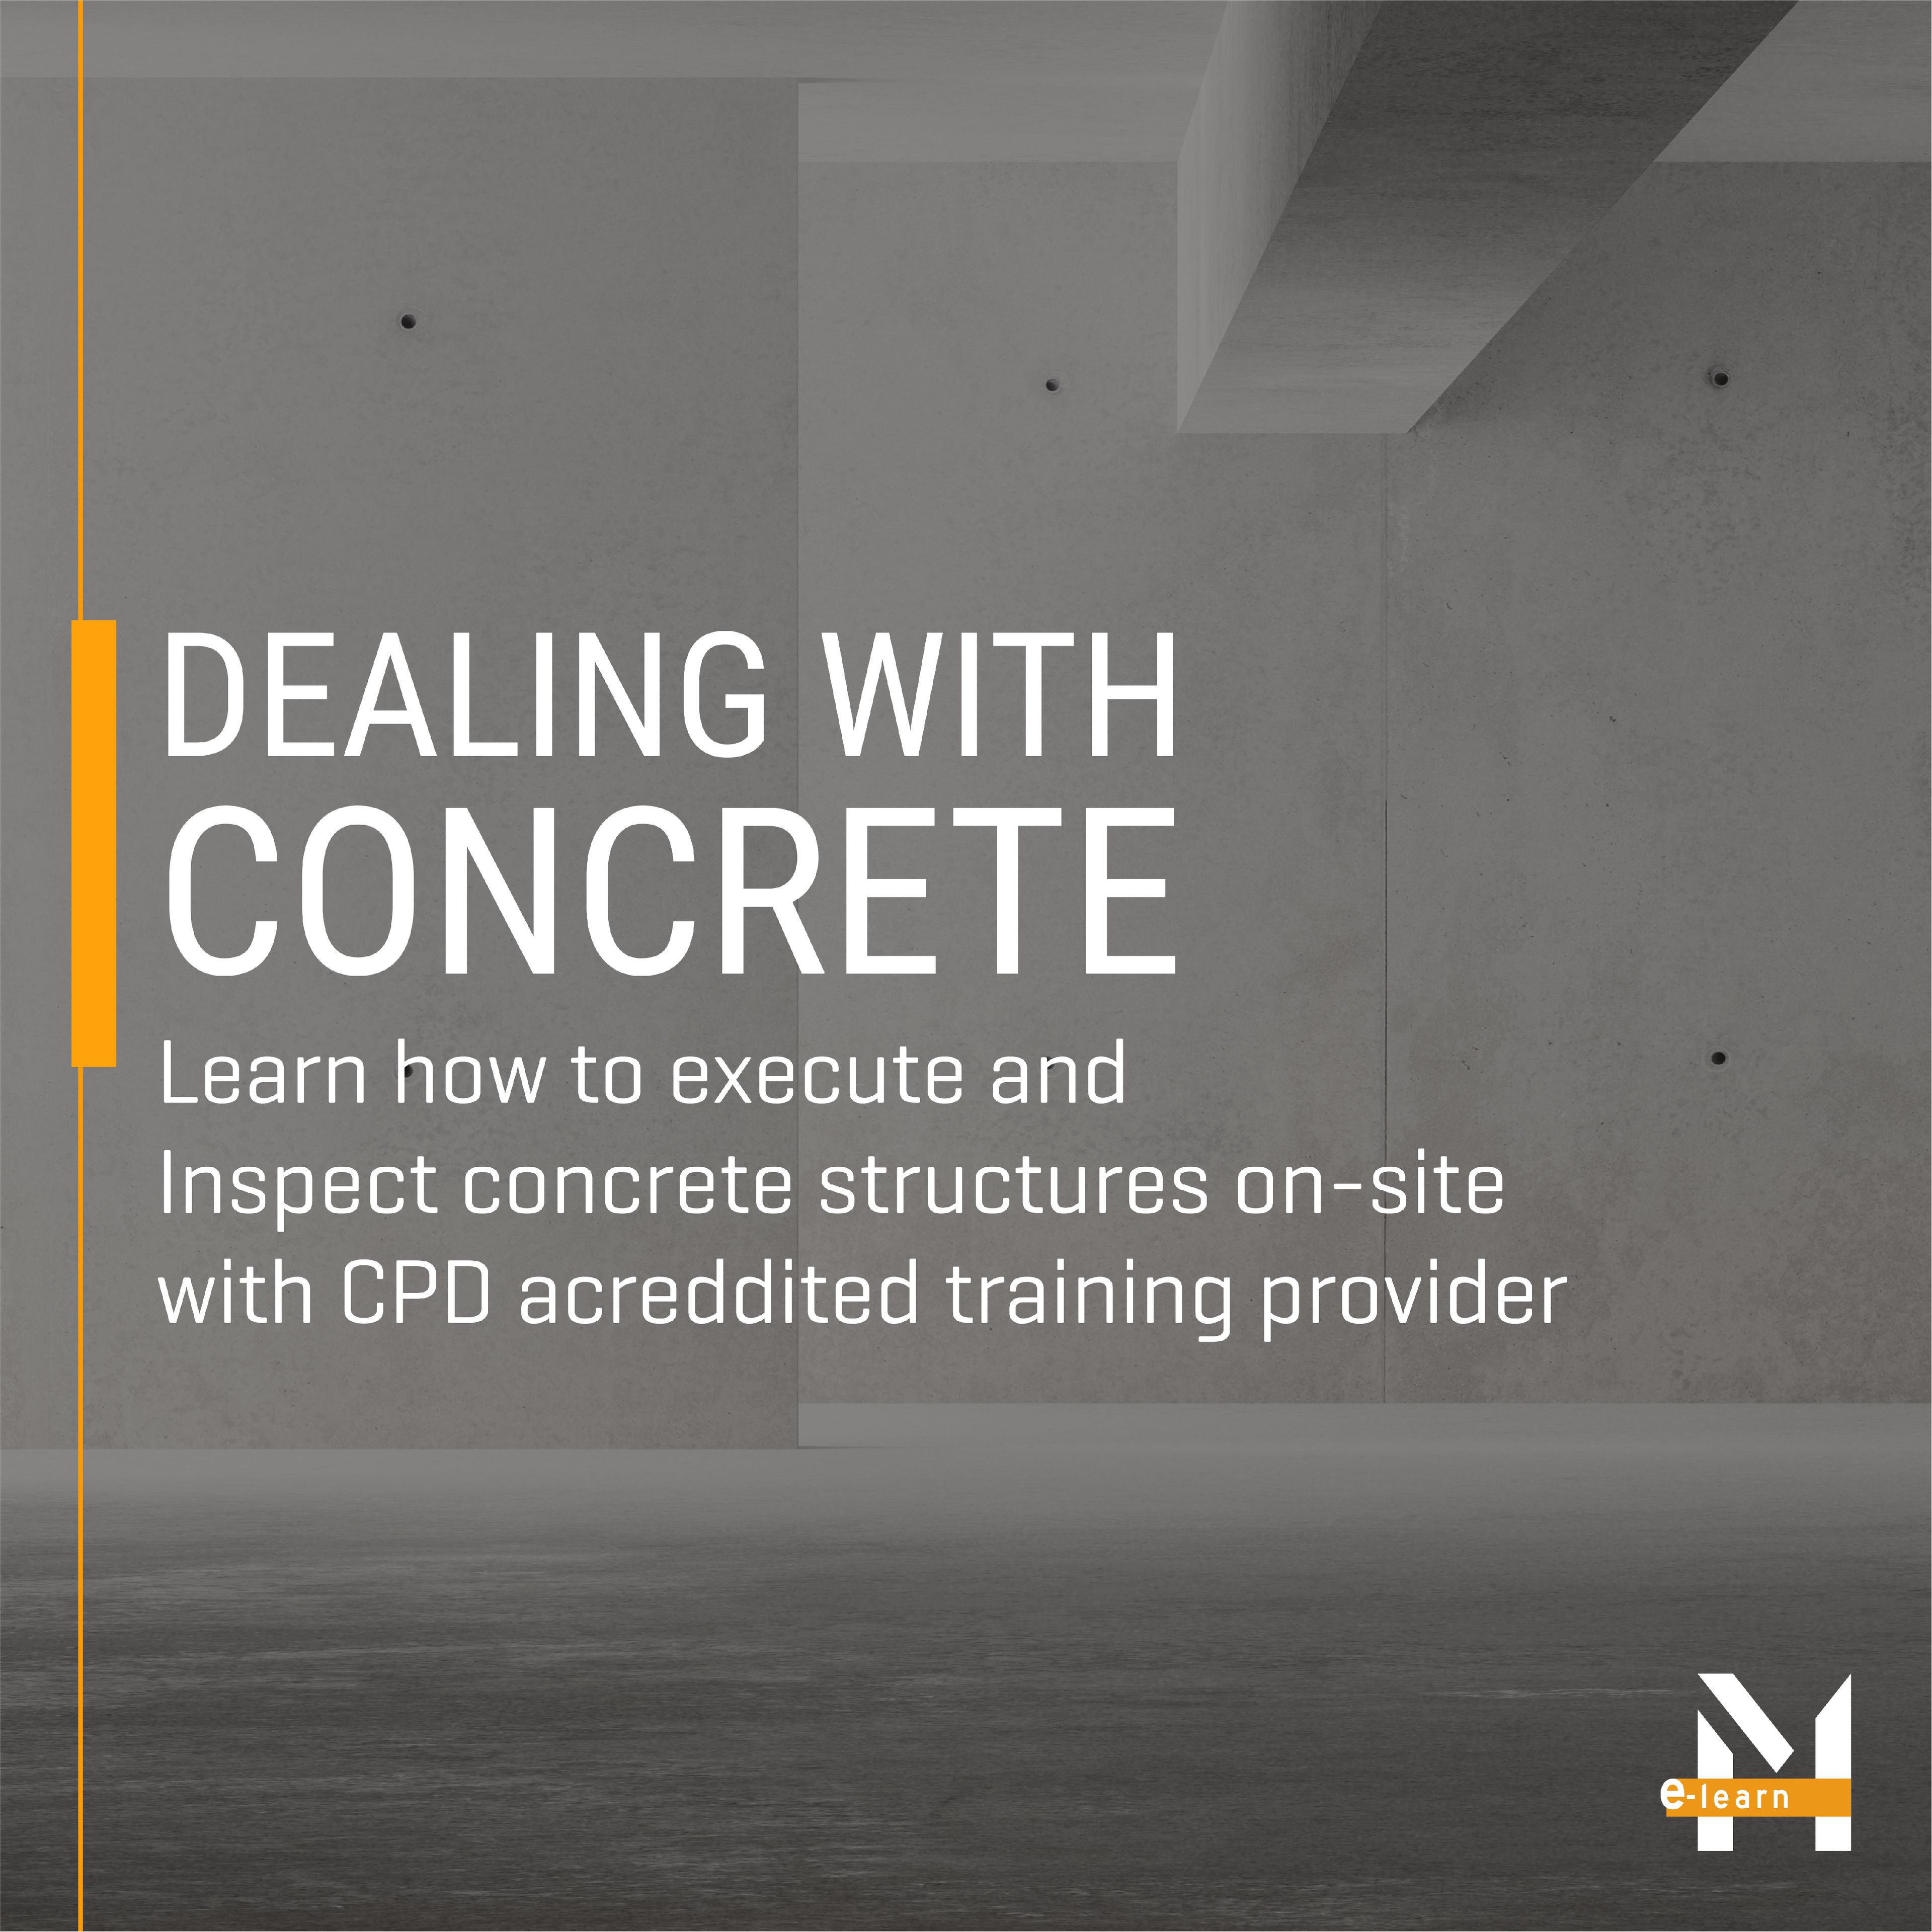 DEALING WITH CONCRETE